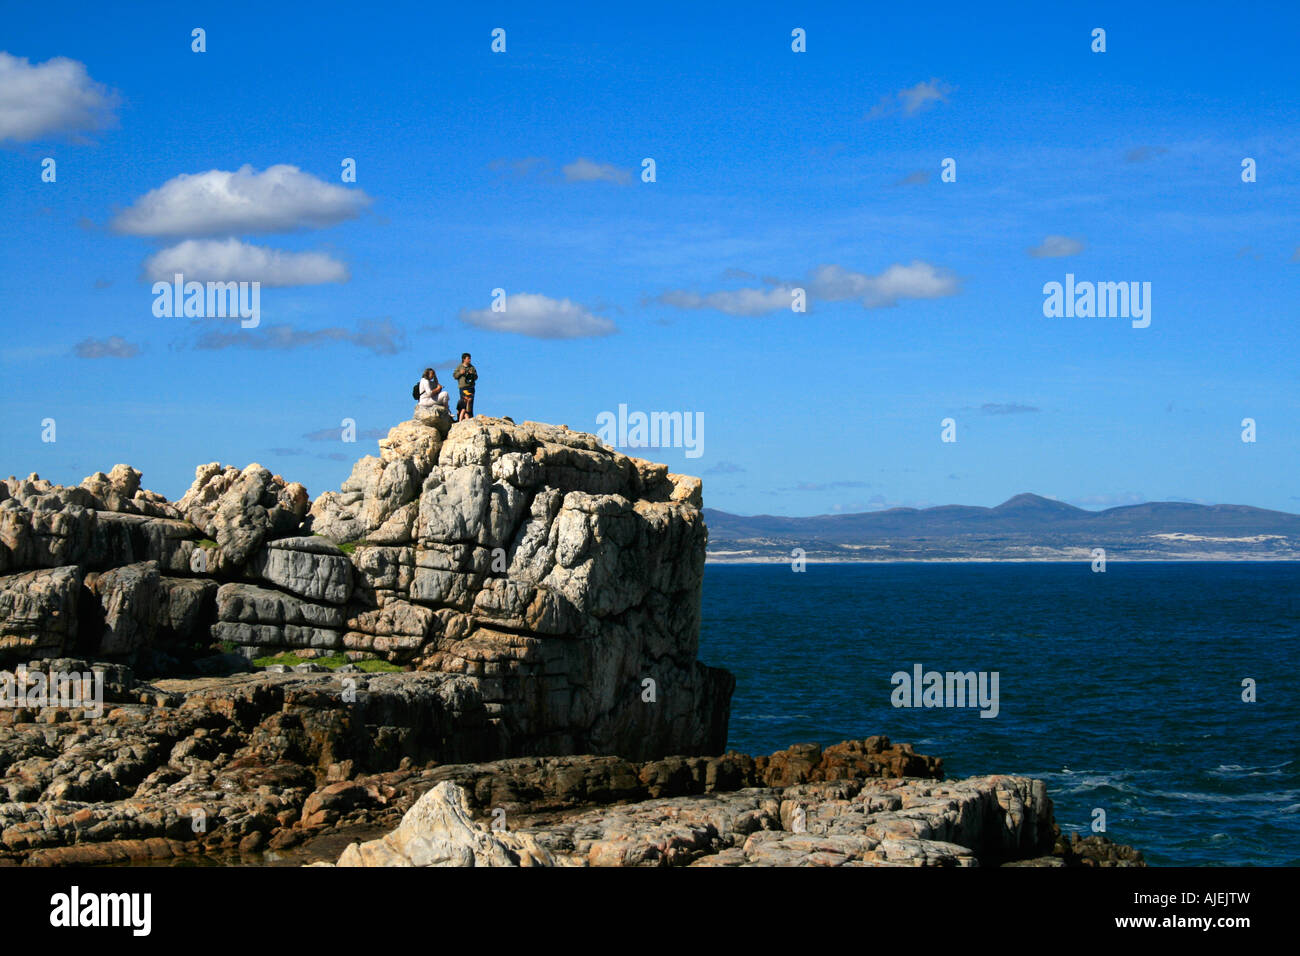 Tourists standing on rocks and enjoying whale watching and wonderful ocean views of Walker Bay in Hermanus, South Africa on sunny day with blue sky Stock Photo